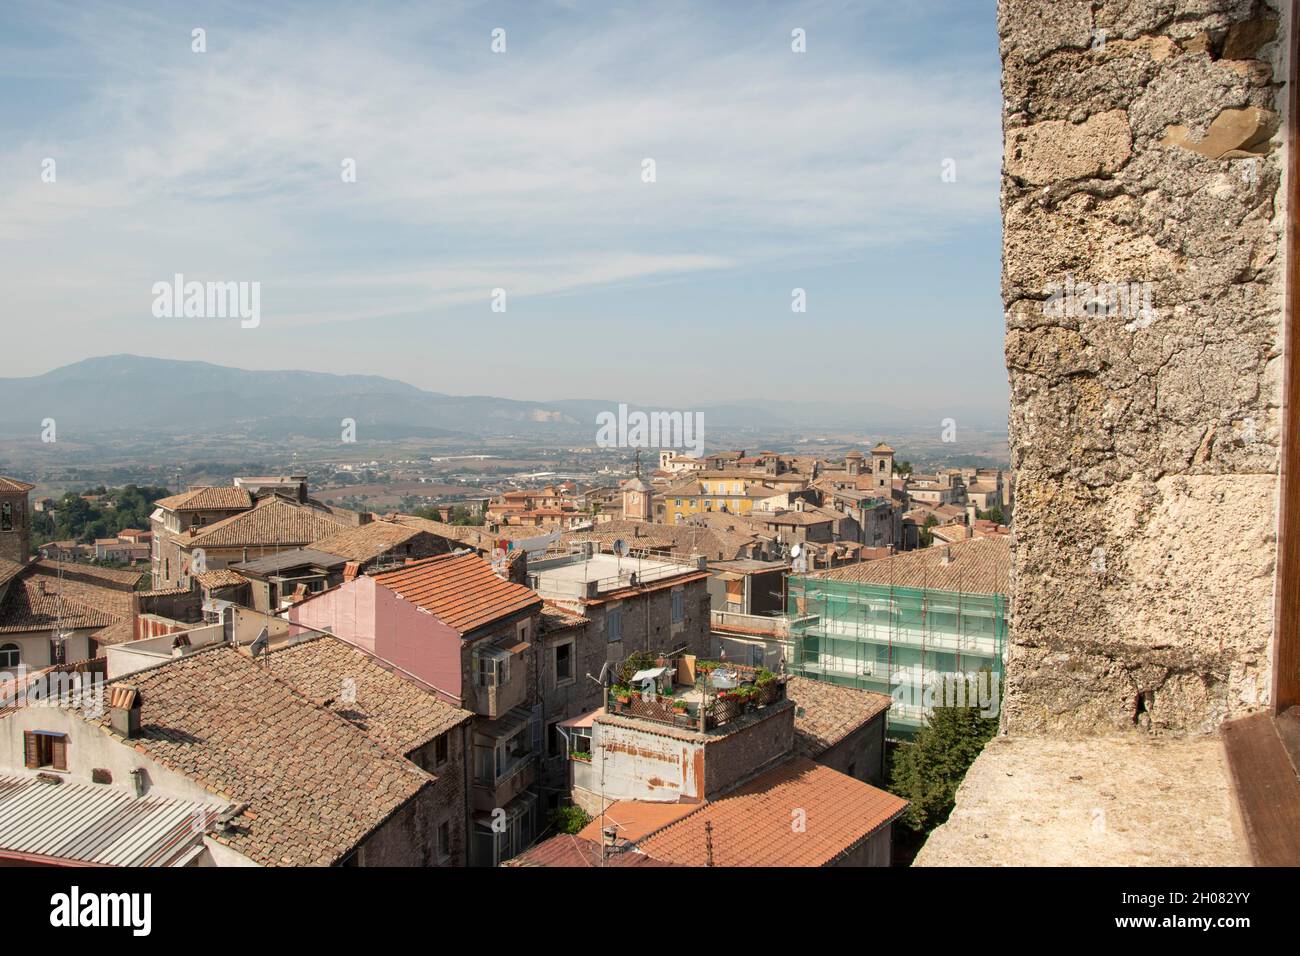 Image of the city of Anagni, an ancient medieval city in central Italy, Europe. Stock Photo